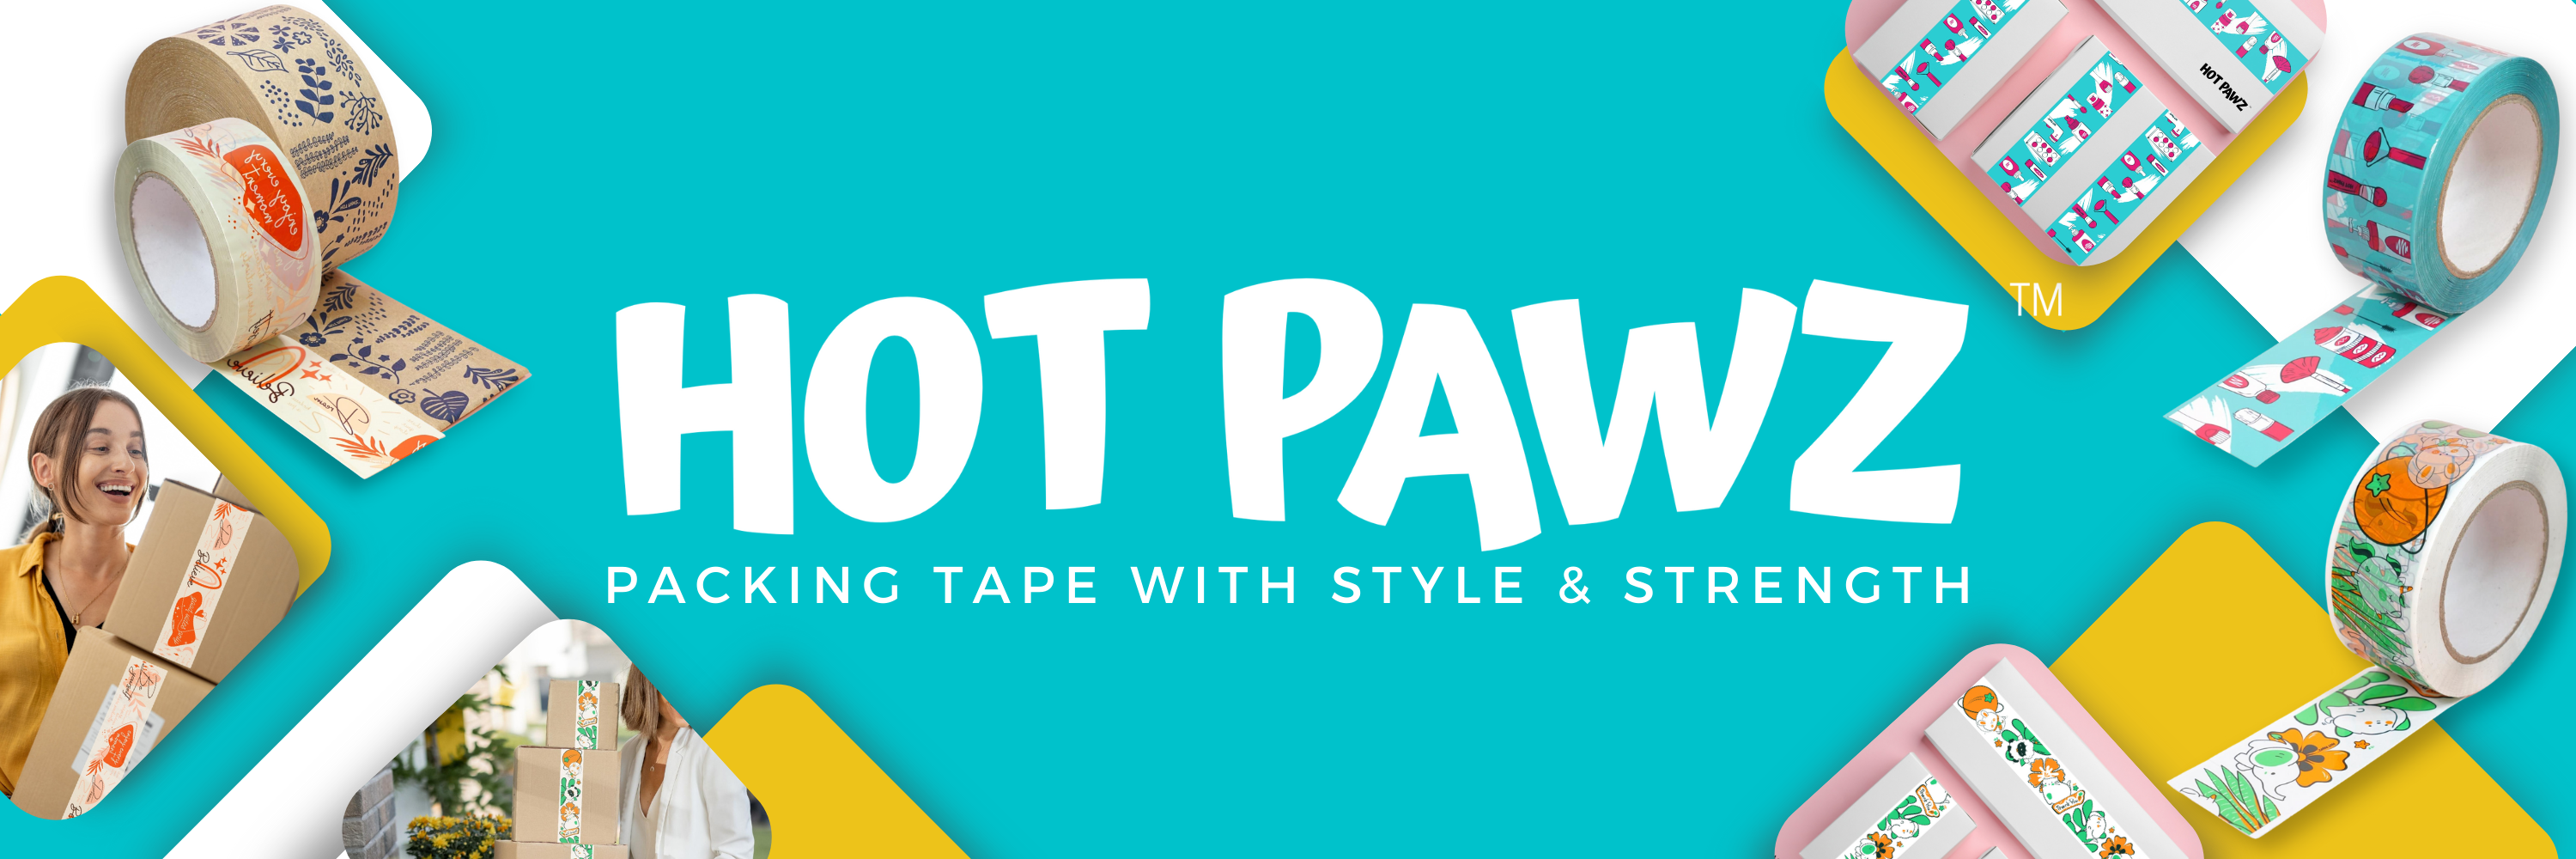 Hot Pawz Decorative Packing Tape Cute Shipping Tape